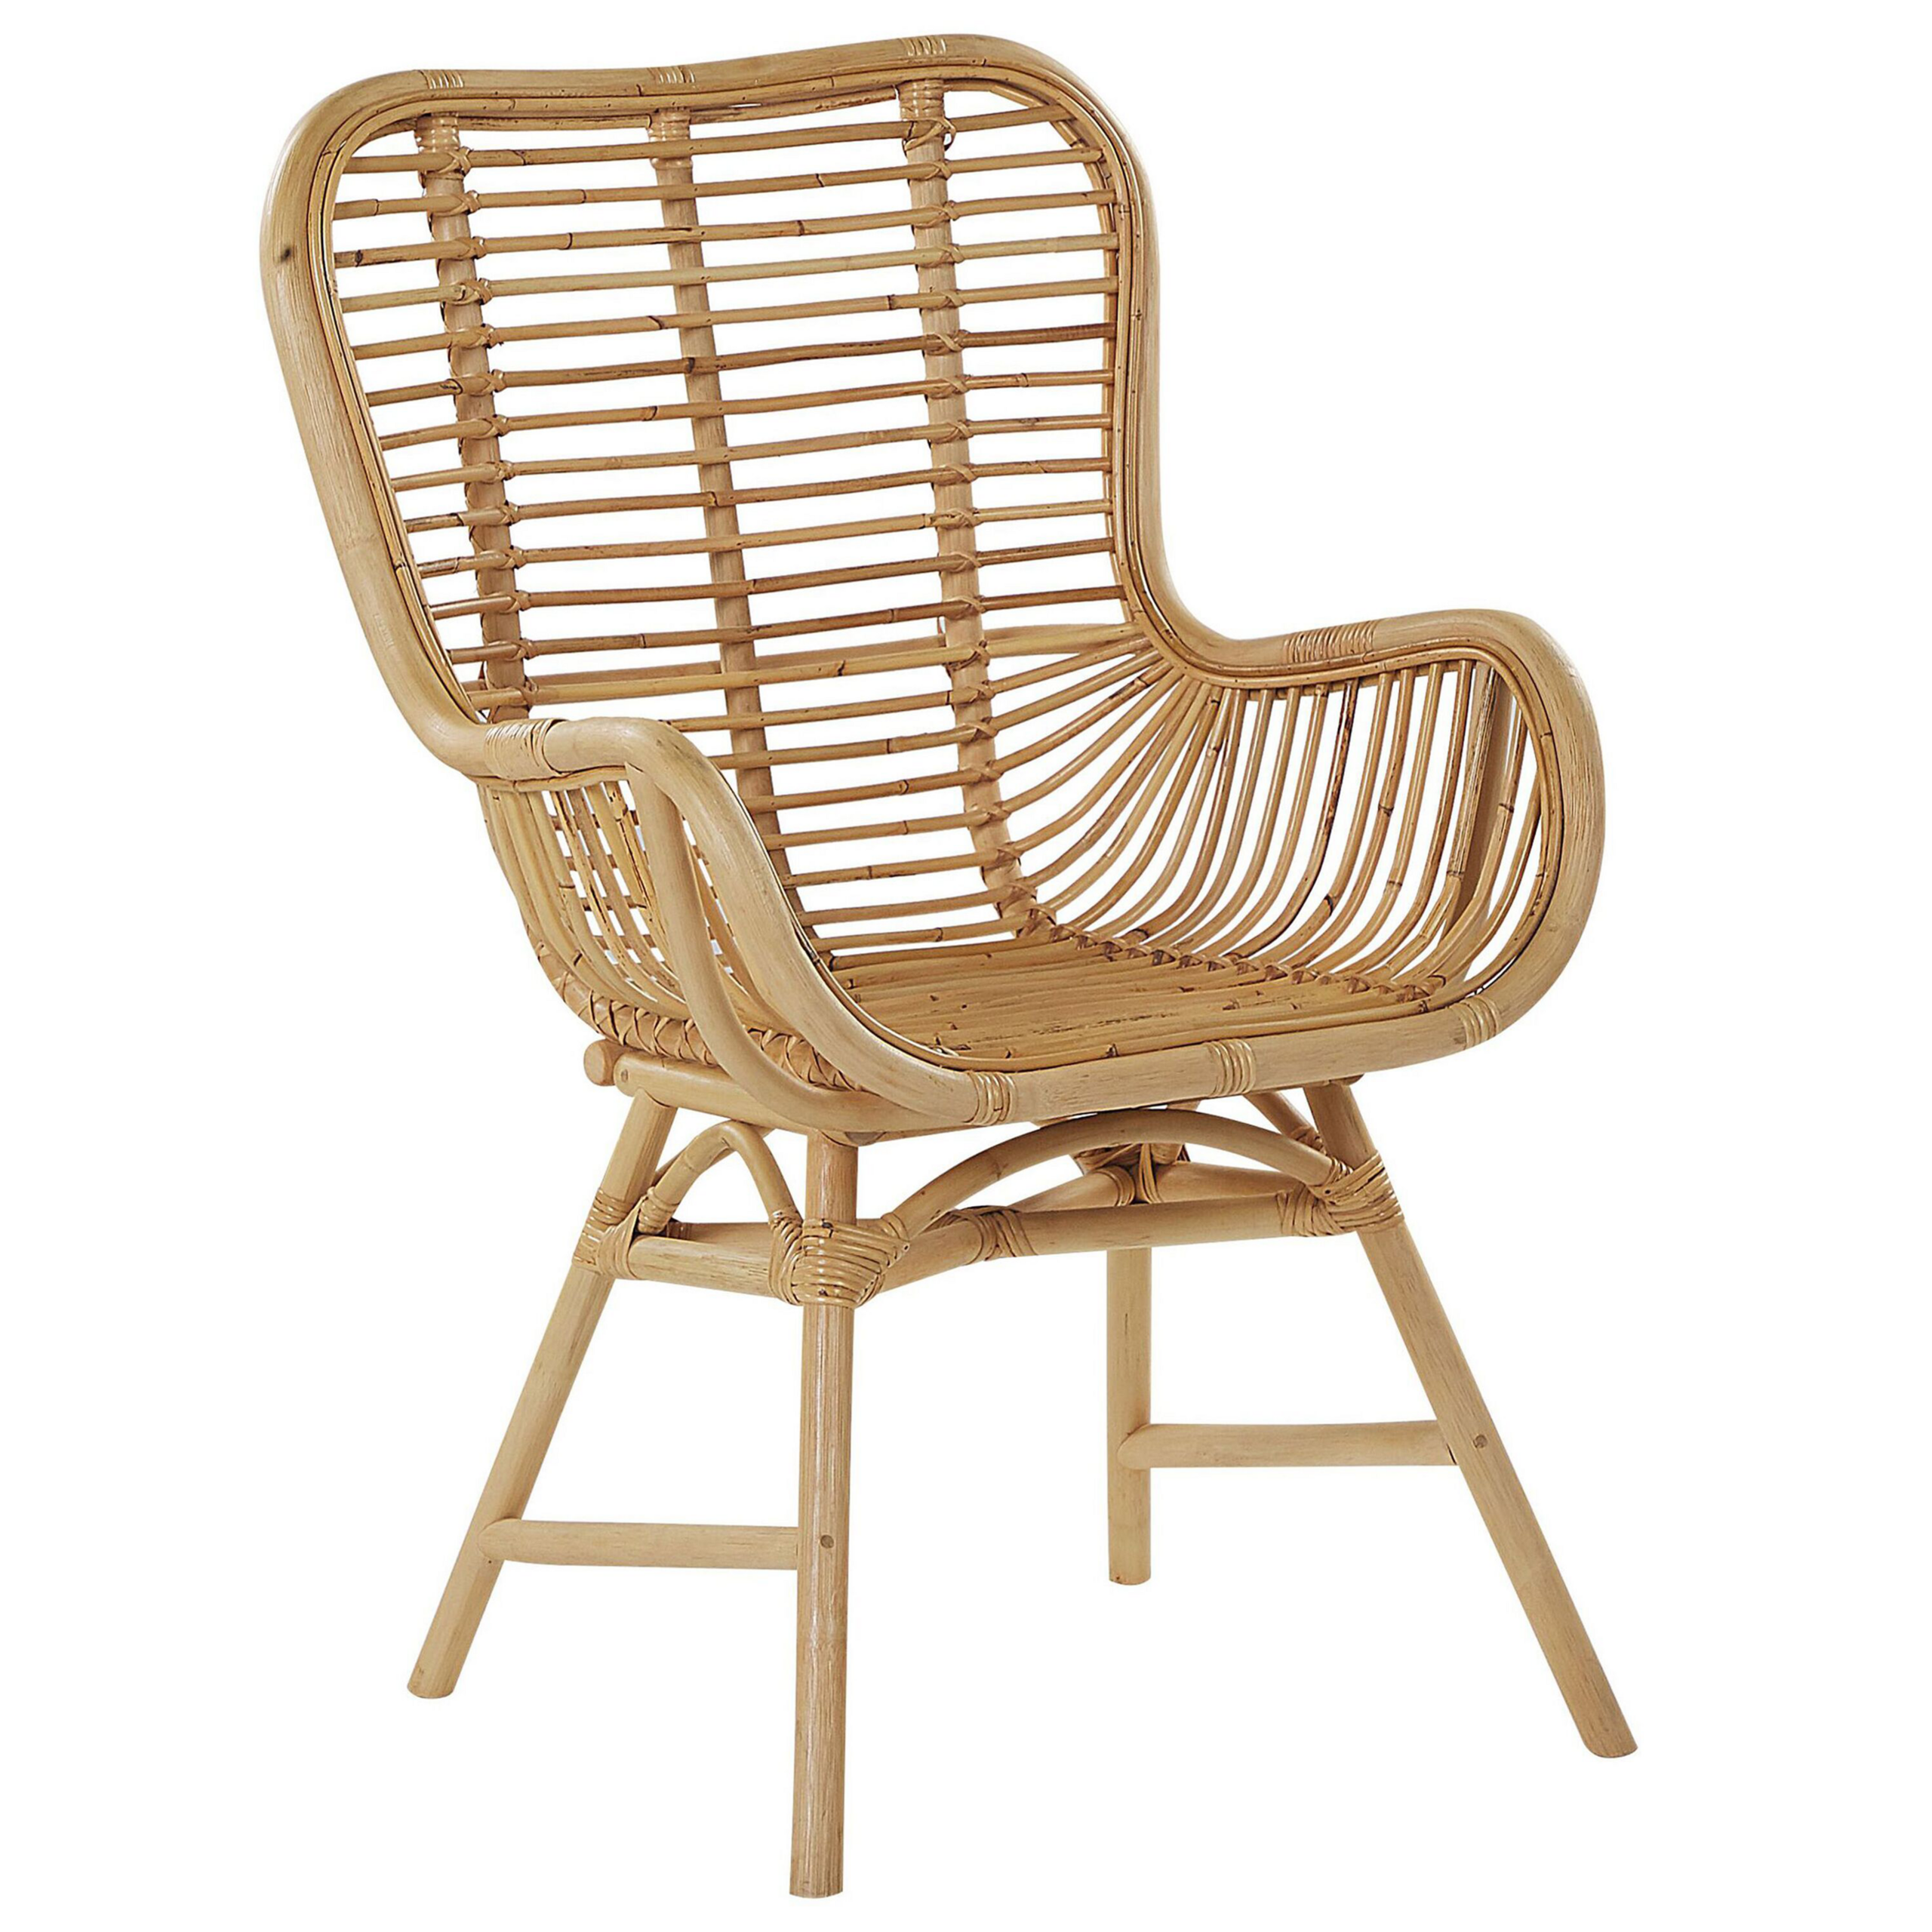 Beliani Accent Chair Light Brown Rattan Indoor Dining Side Chair Living Room Furniture High Backrest Material:Rattan Size:52x96x61